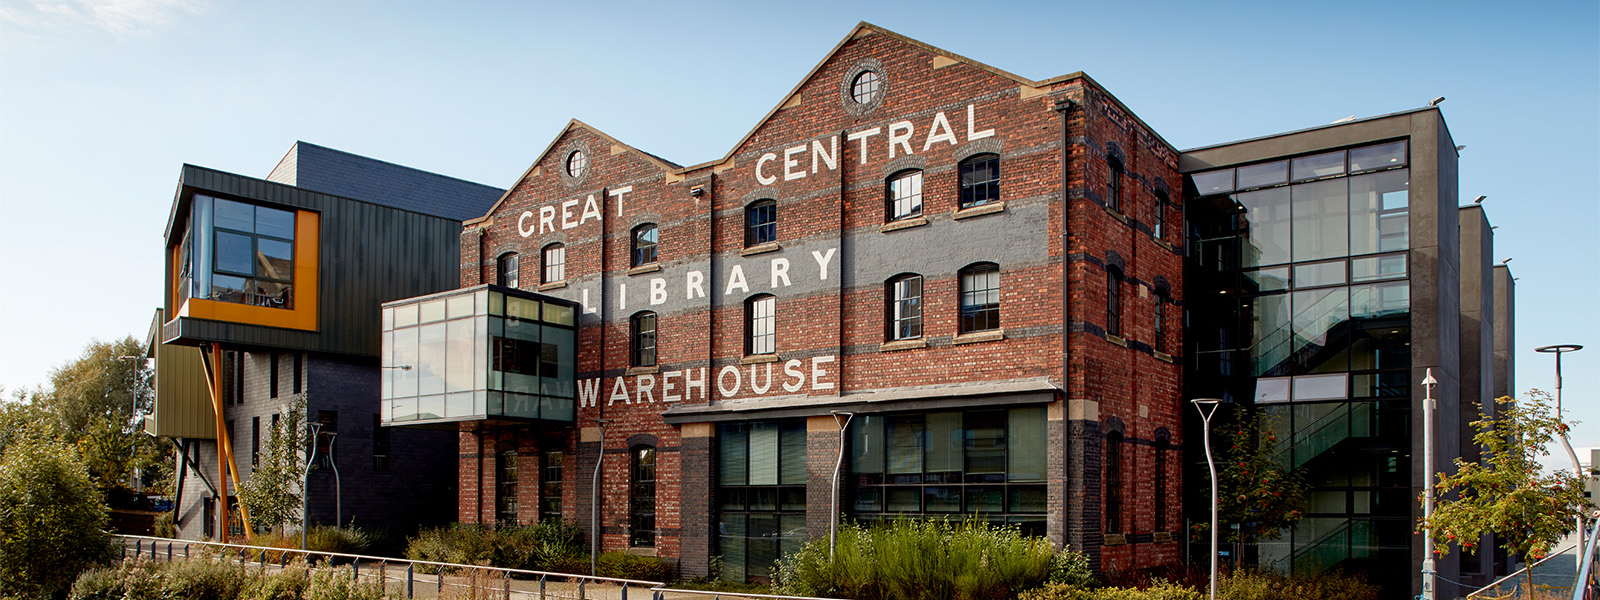 The Great Central Warehouse Library